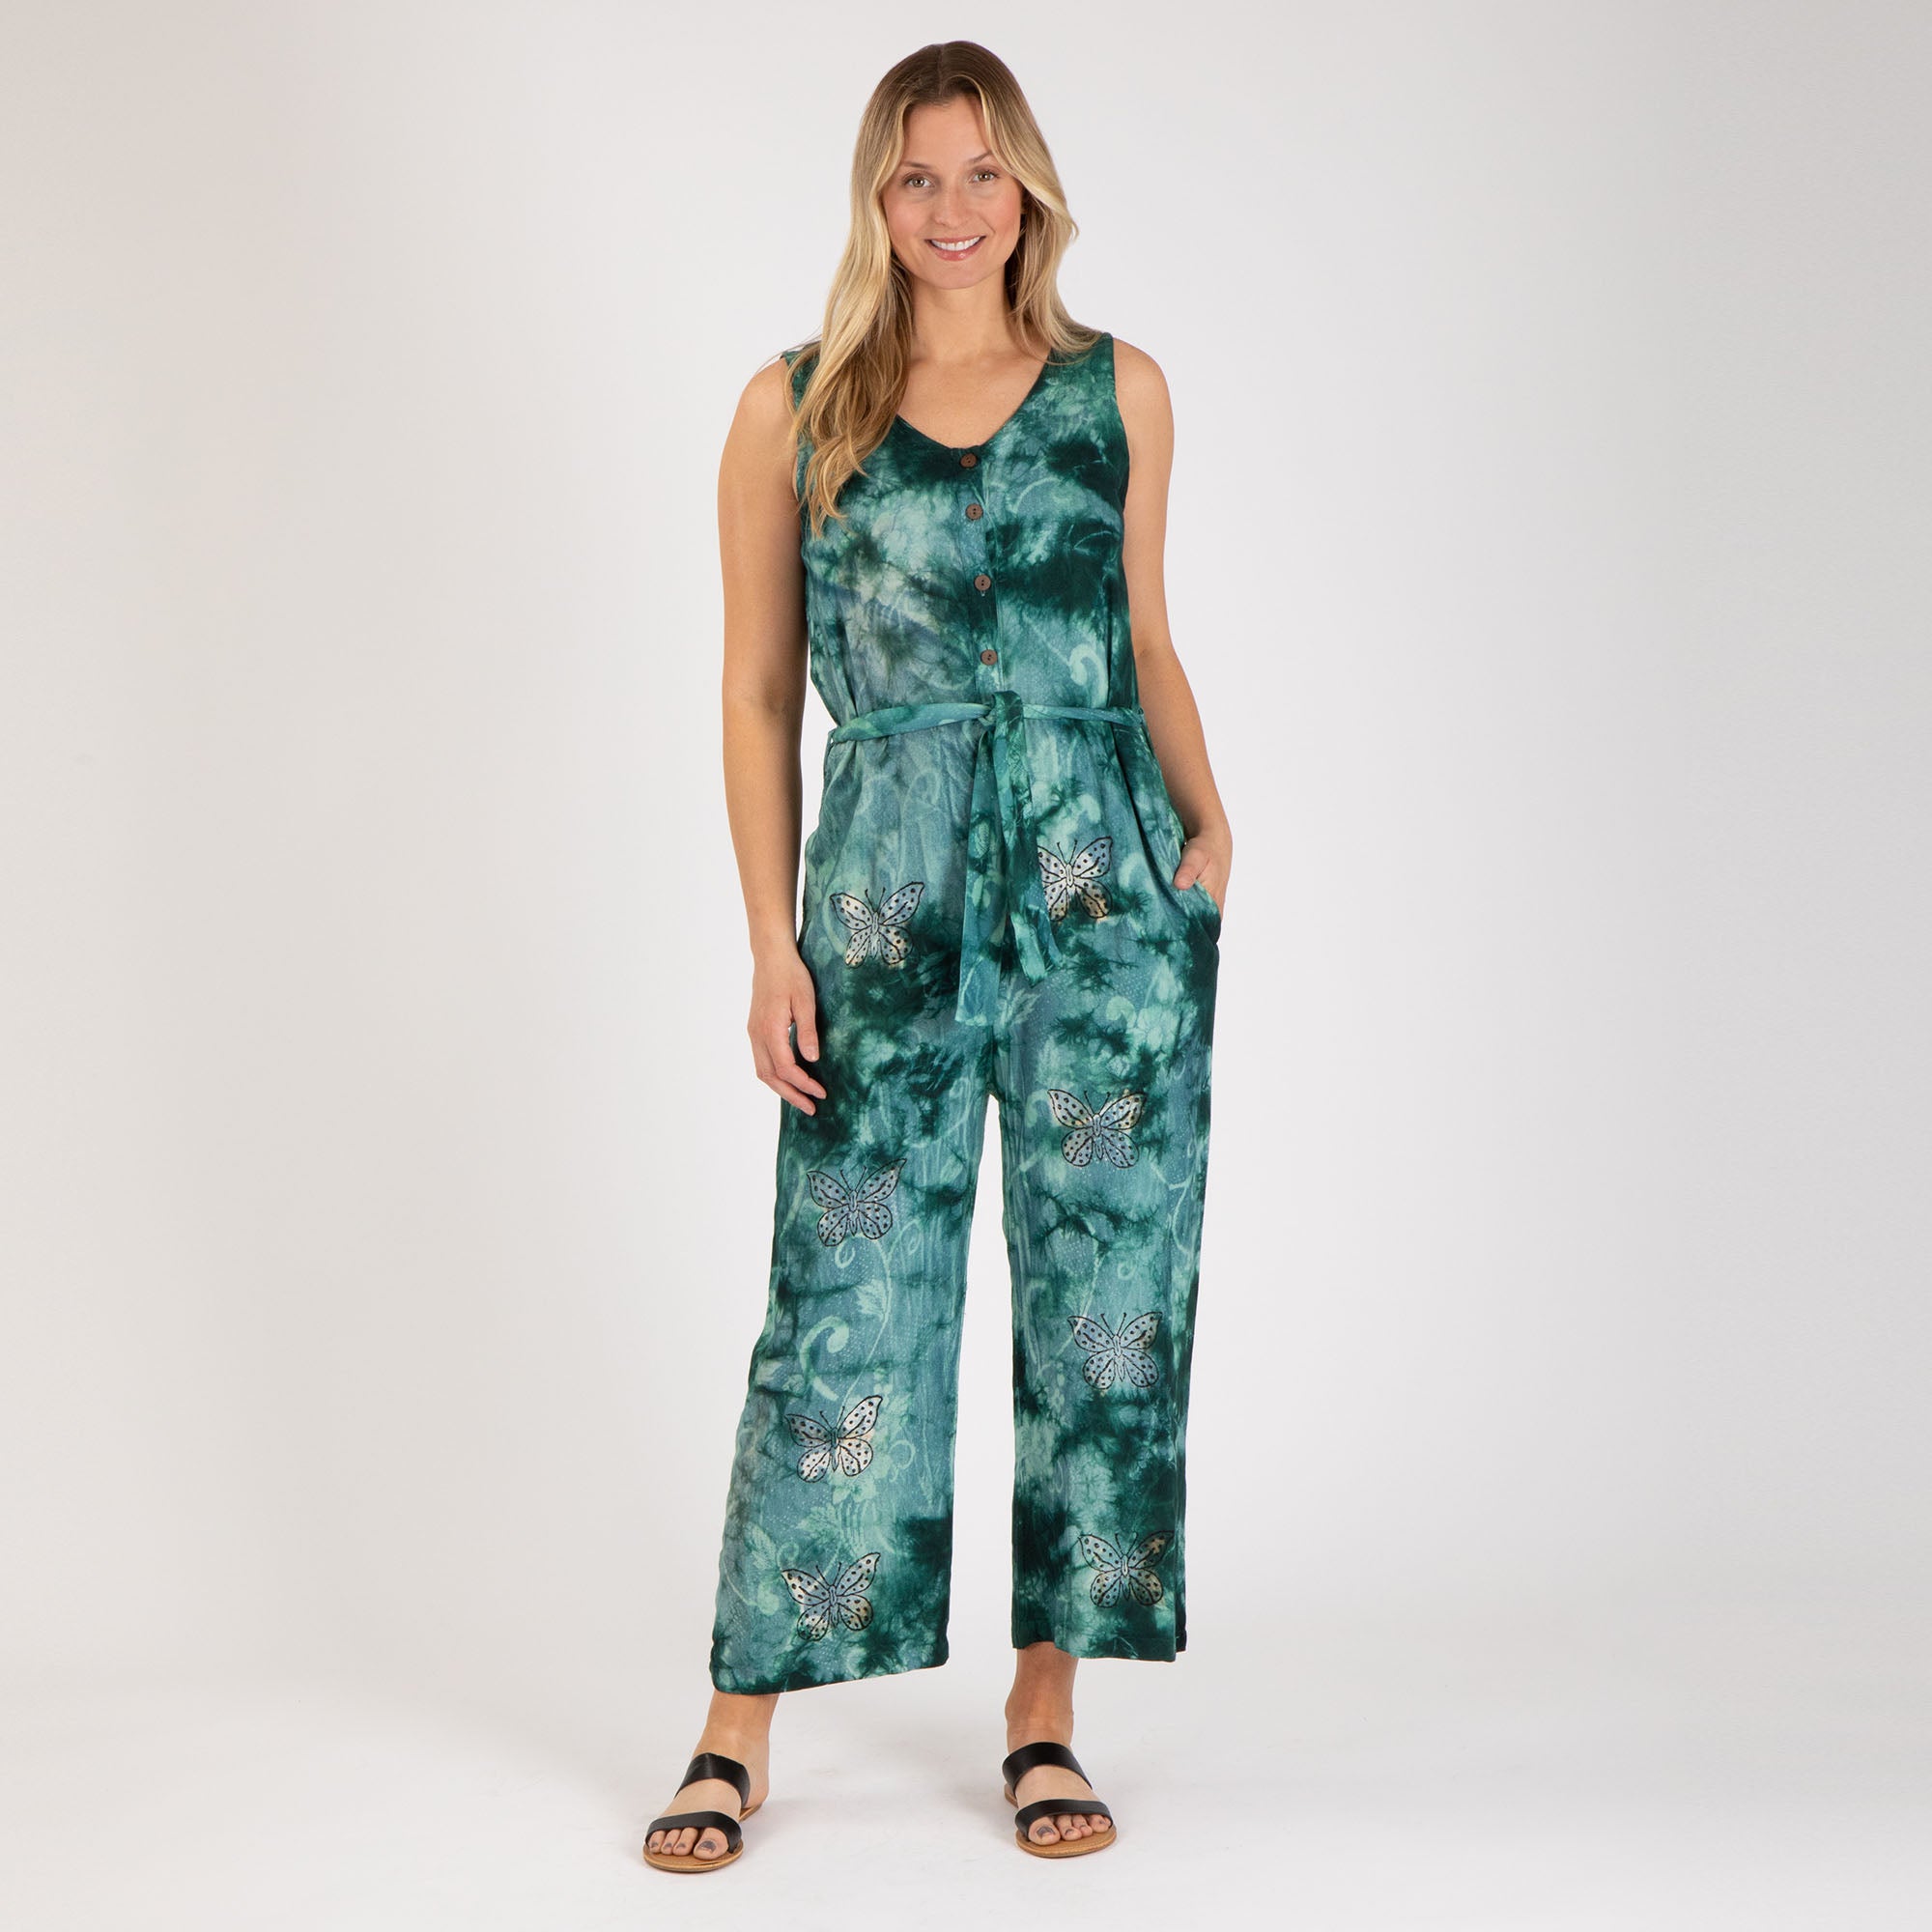 Butterflies In Bloom Hand Crafted Jumpsuit - 2X